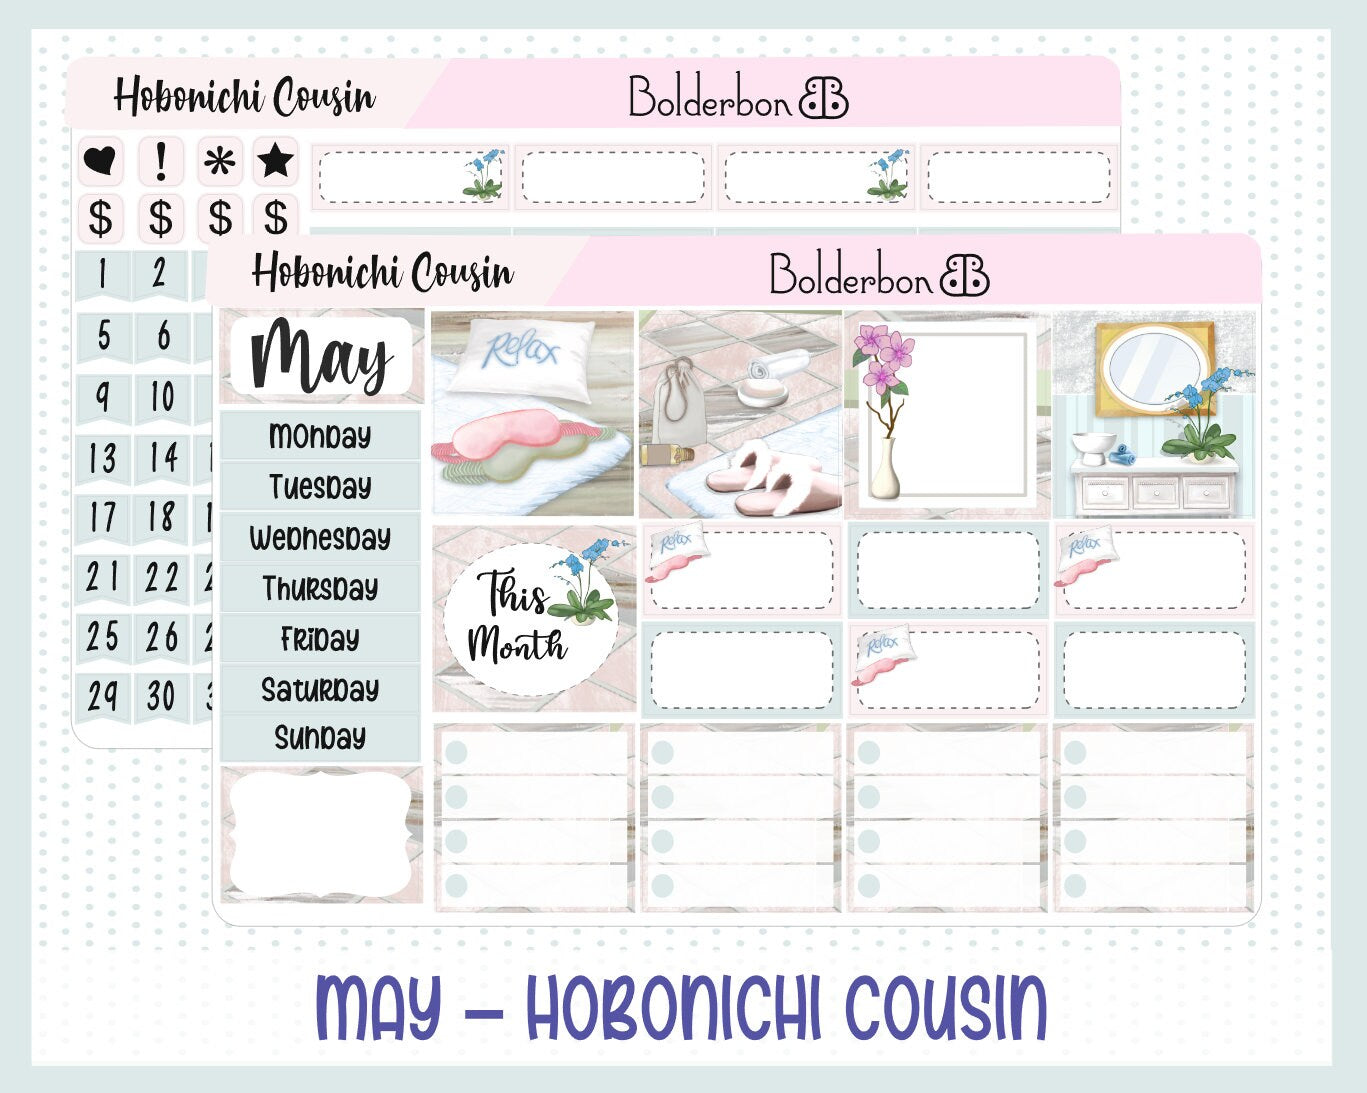 MAY Hobonichi Cousin and A5 Day Free || Monthly Planner Sticker Kit, Self Care, Relax, Refresh